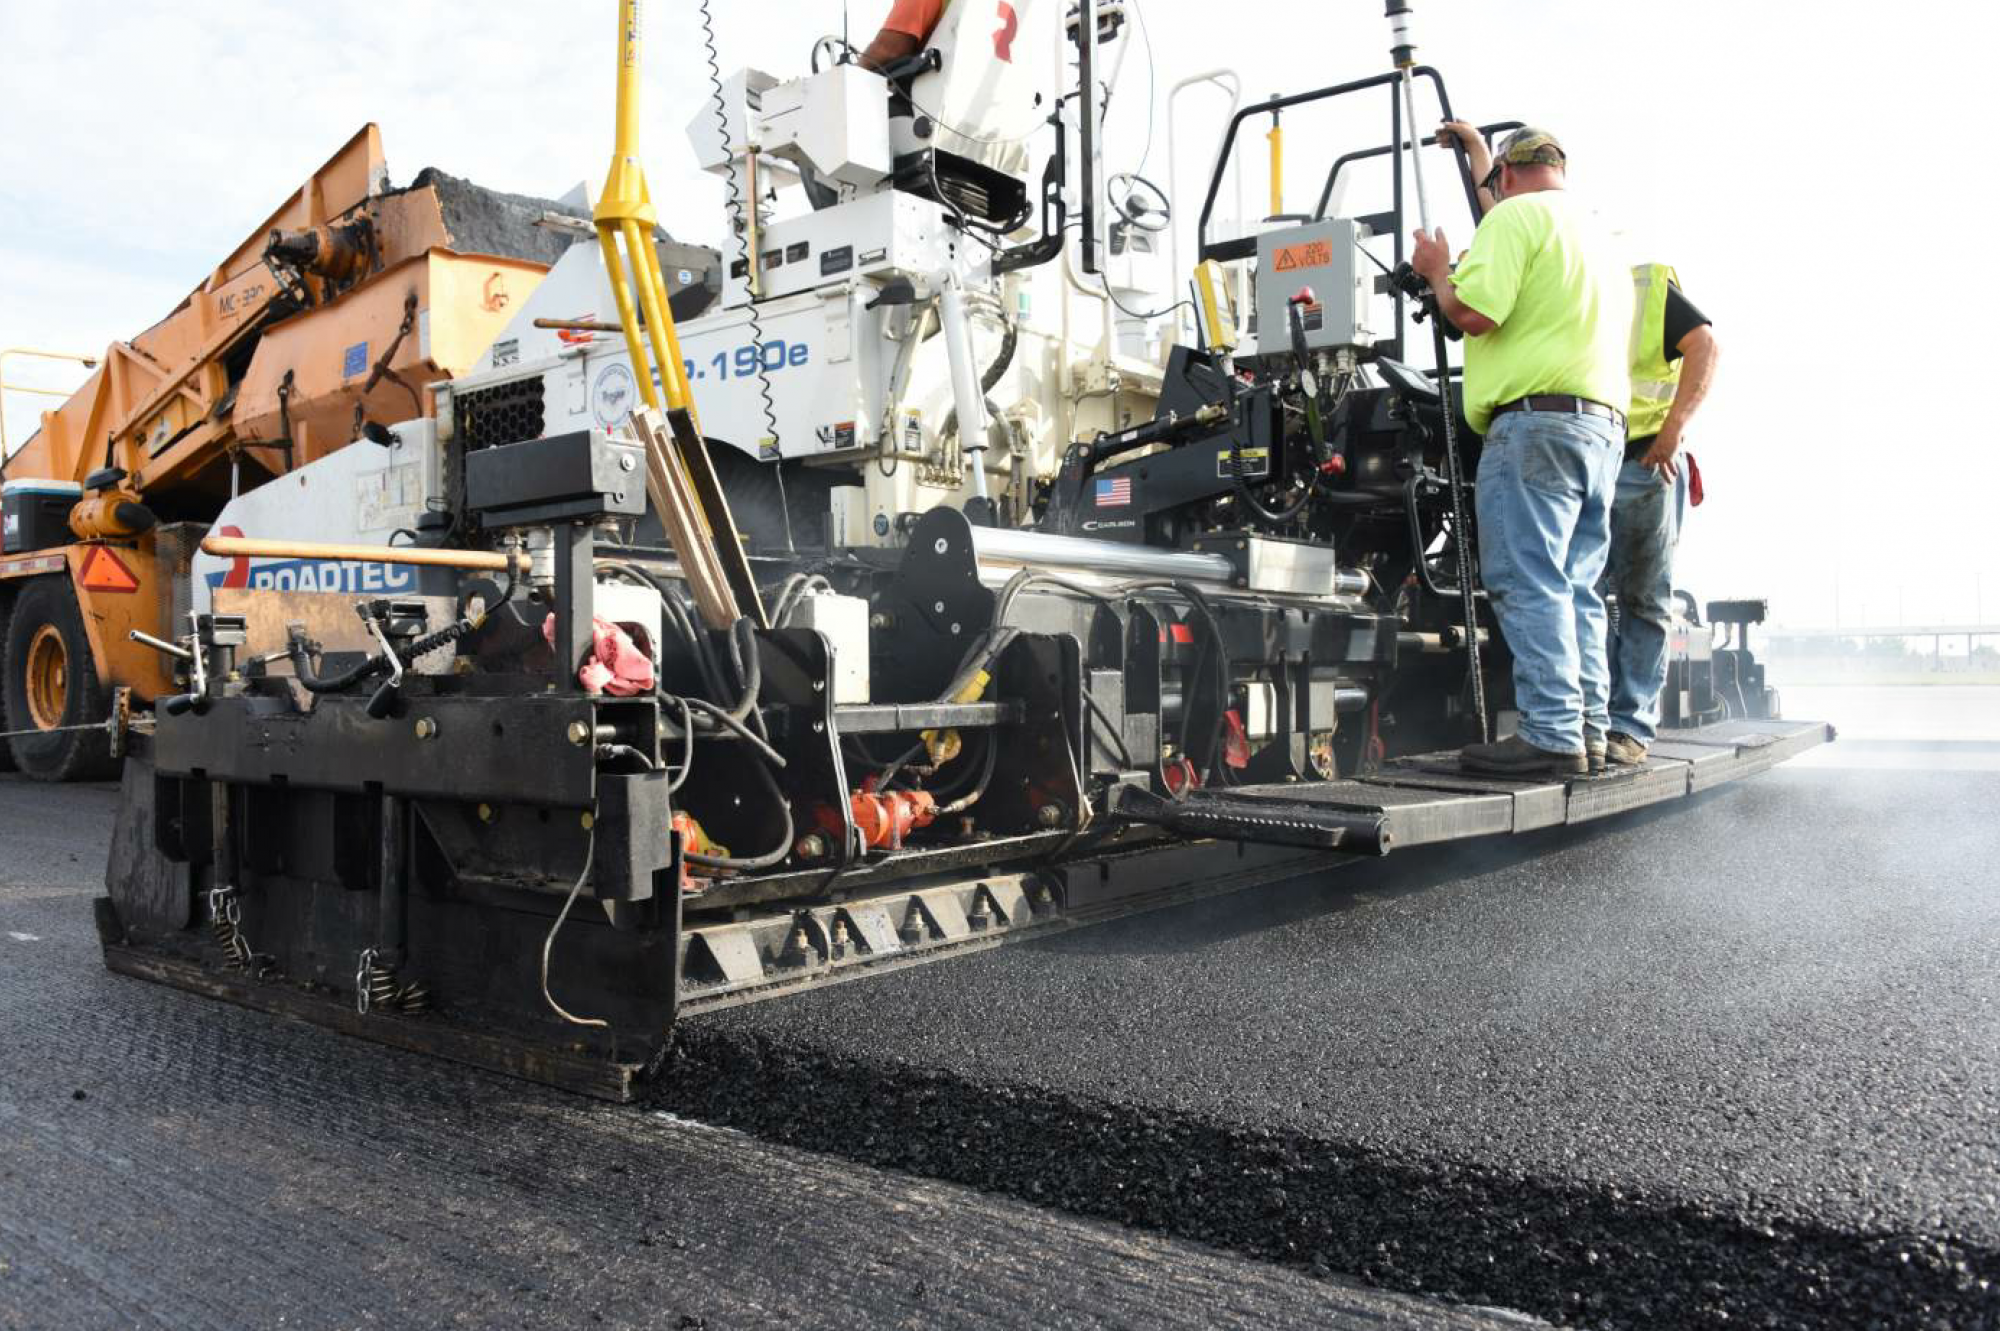 “Full depth blacktop included 8 inches of base course done in two lifts using 16,200 tons of P-401 HMA, and 4 compacted inches of surface course done in two lifts of 2 inches each,” according to Union Paving Foreman Jim Stayer.